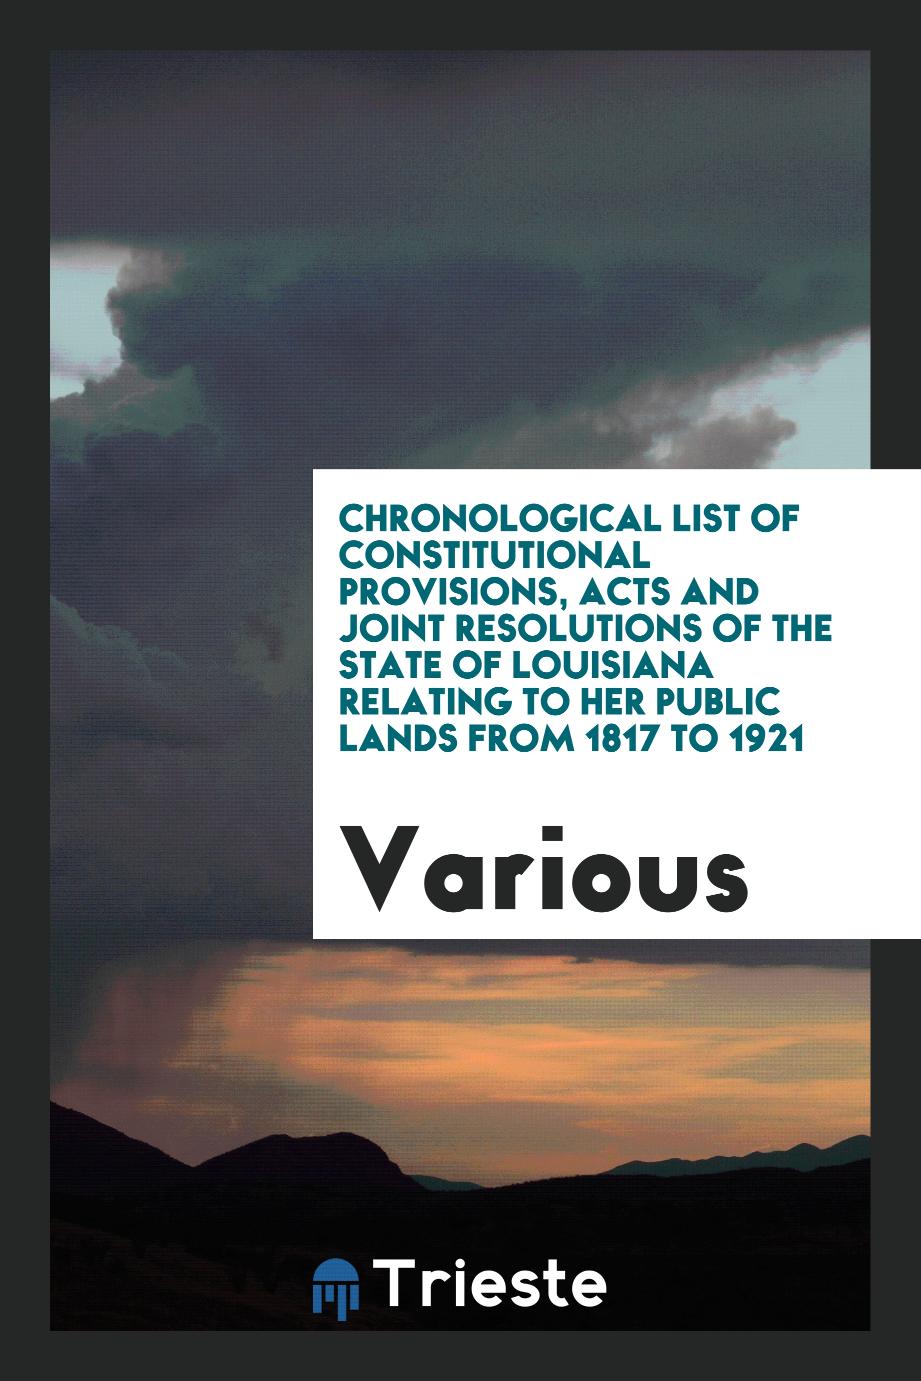 Chronological List of Constitutional Provisions, Acts and Joint Resolutions of the State of Louisiana Relating to Her Public Lands from 1817 to 1921